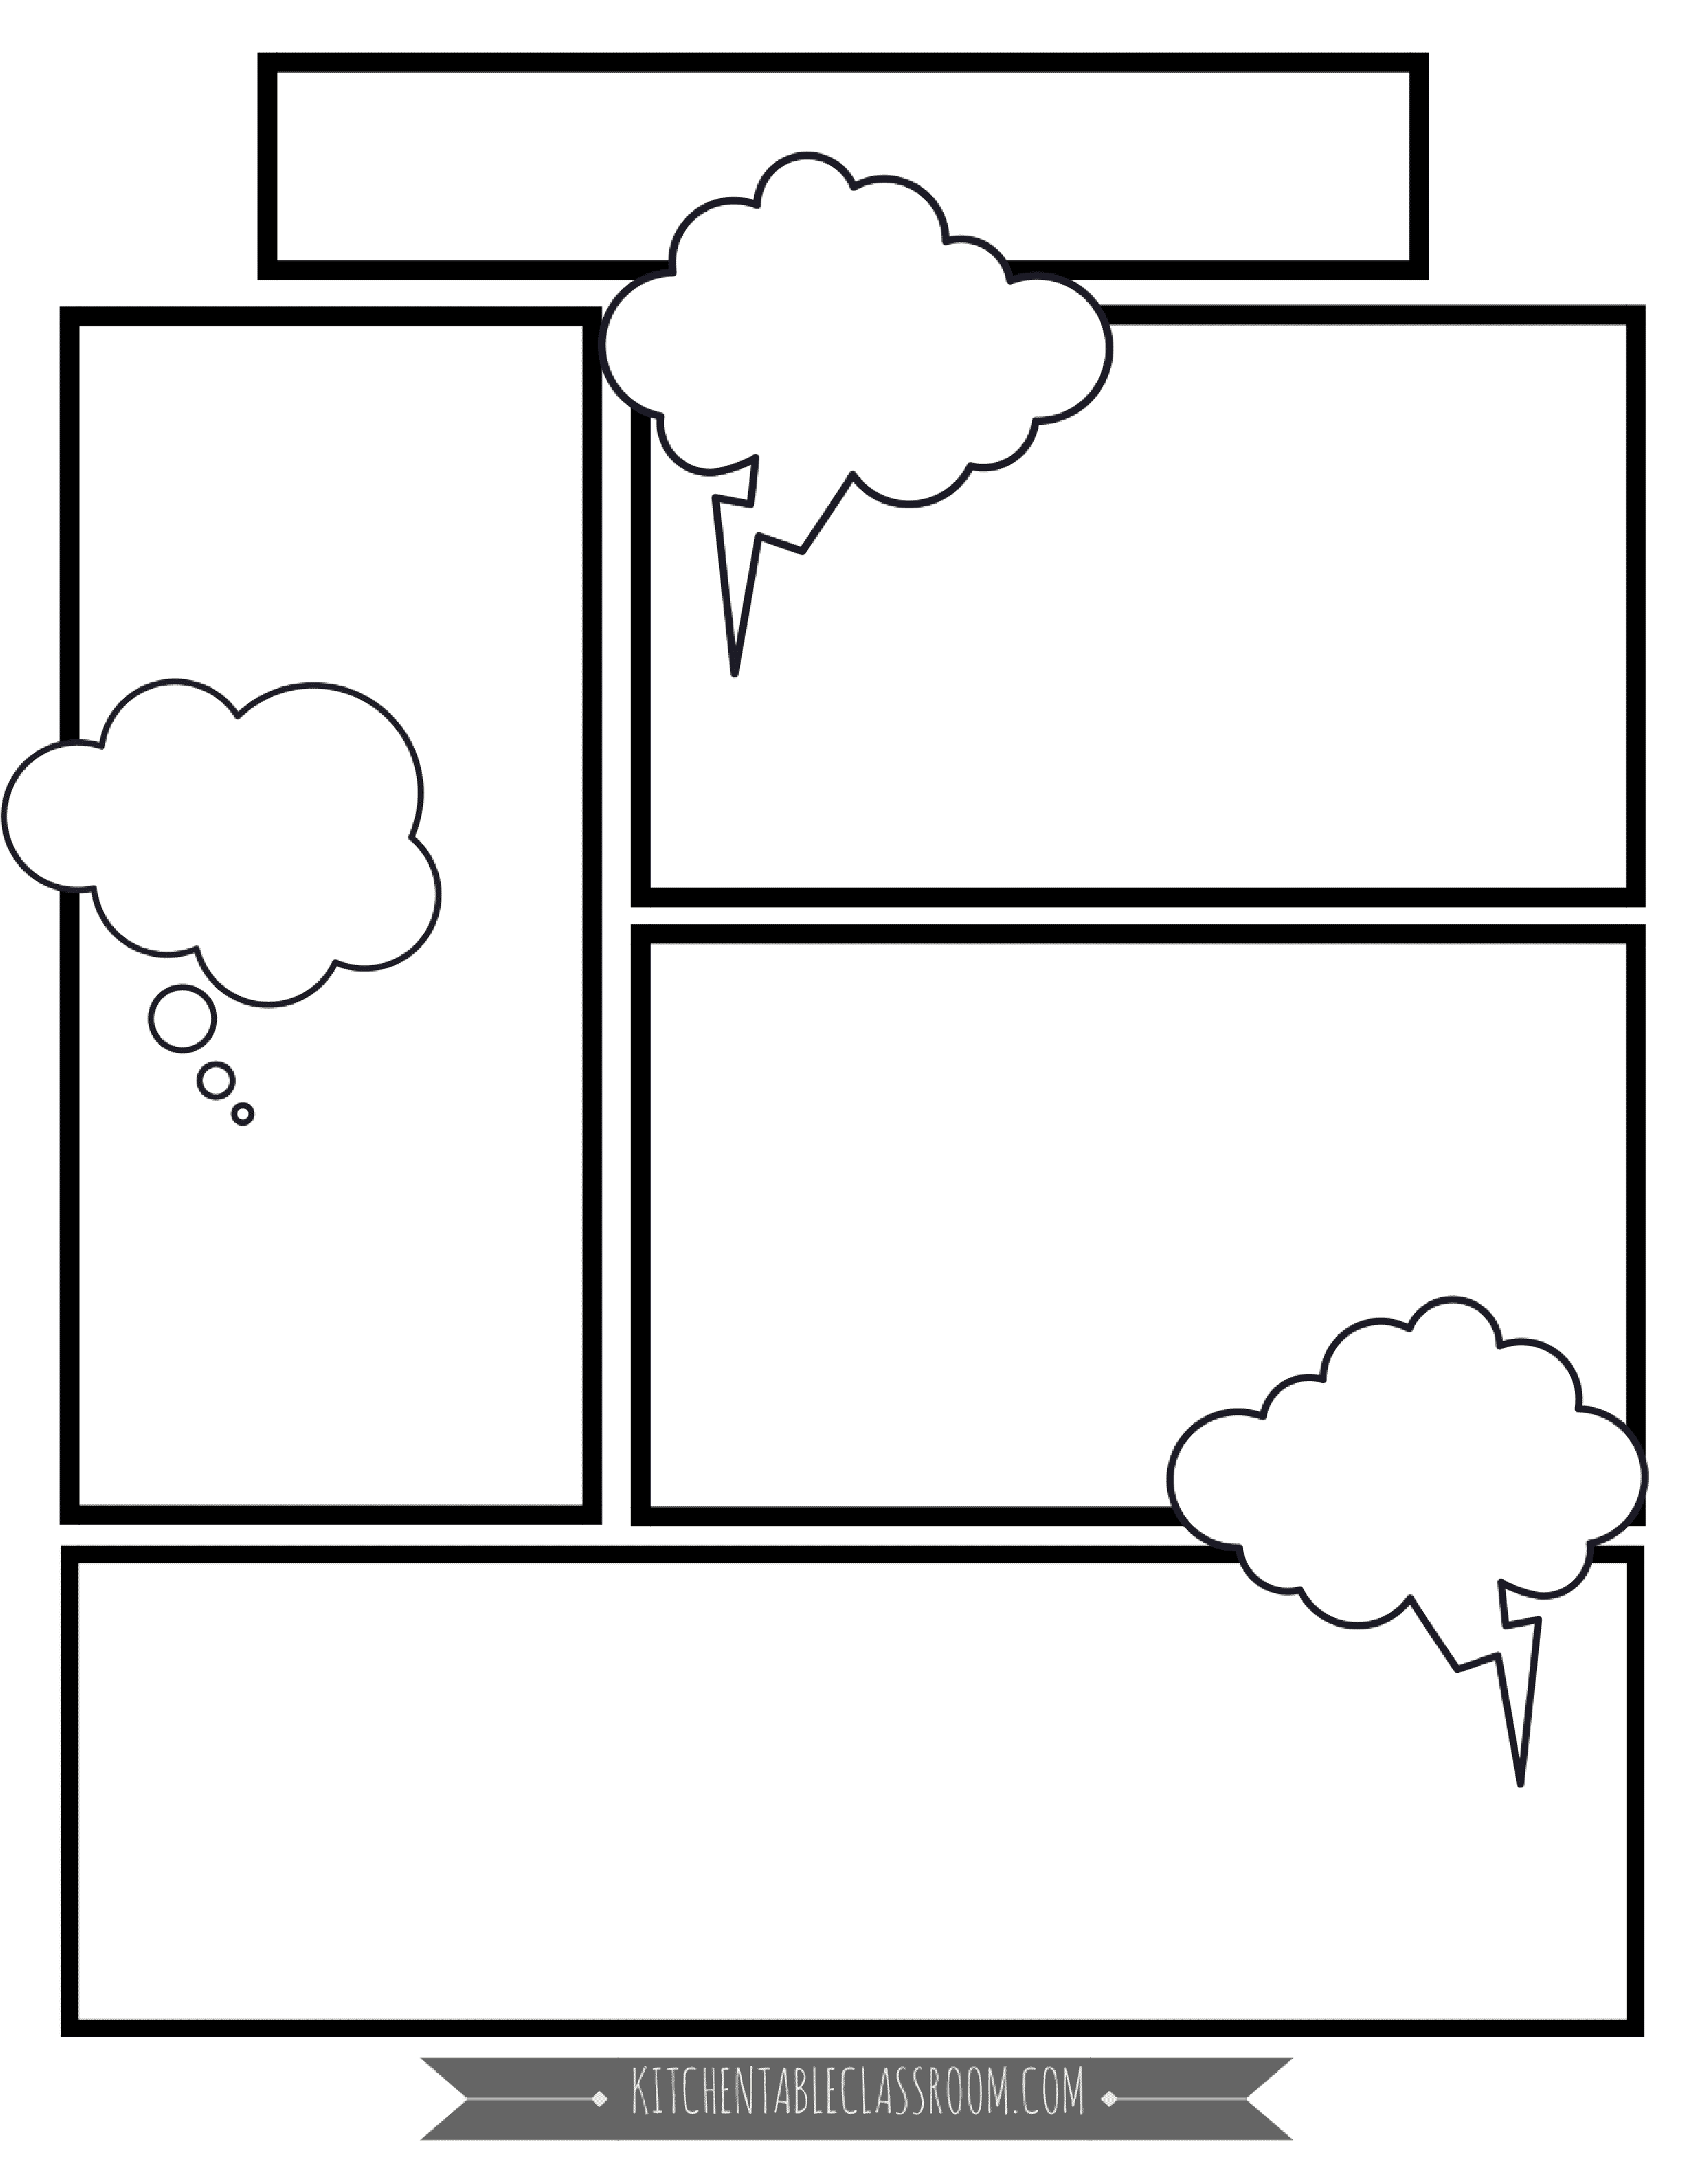 comic template 24 png - The Kitchen Table Classroom Pertaining To Printable Blank Comic Strip Template For Kids